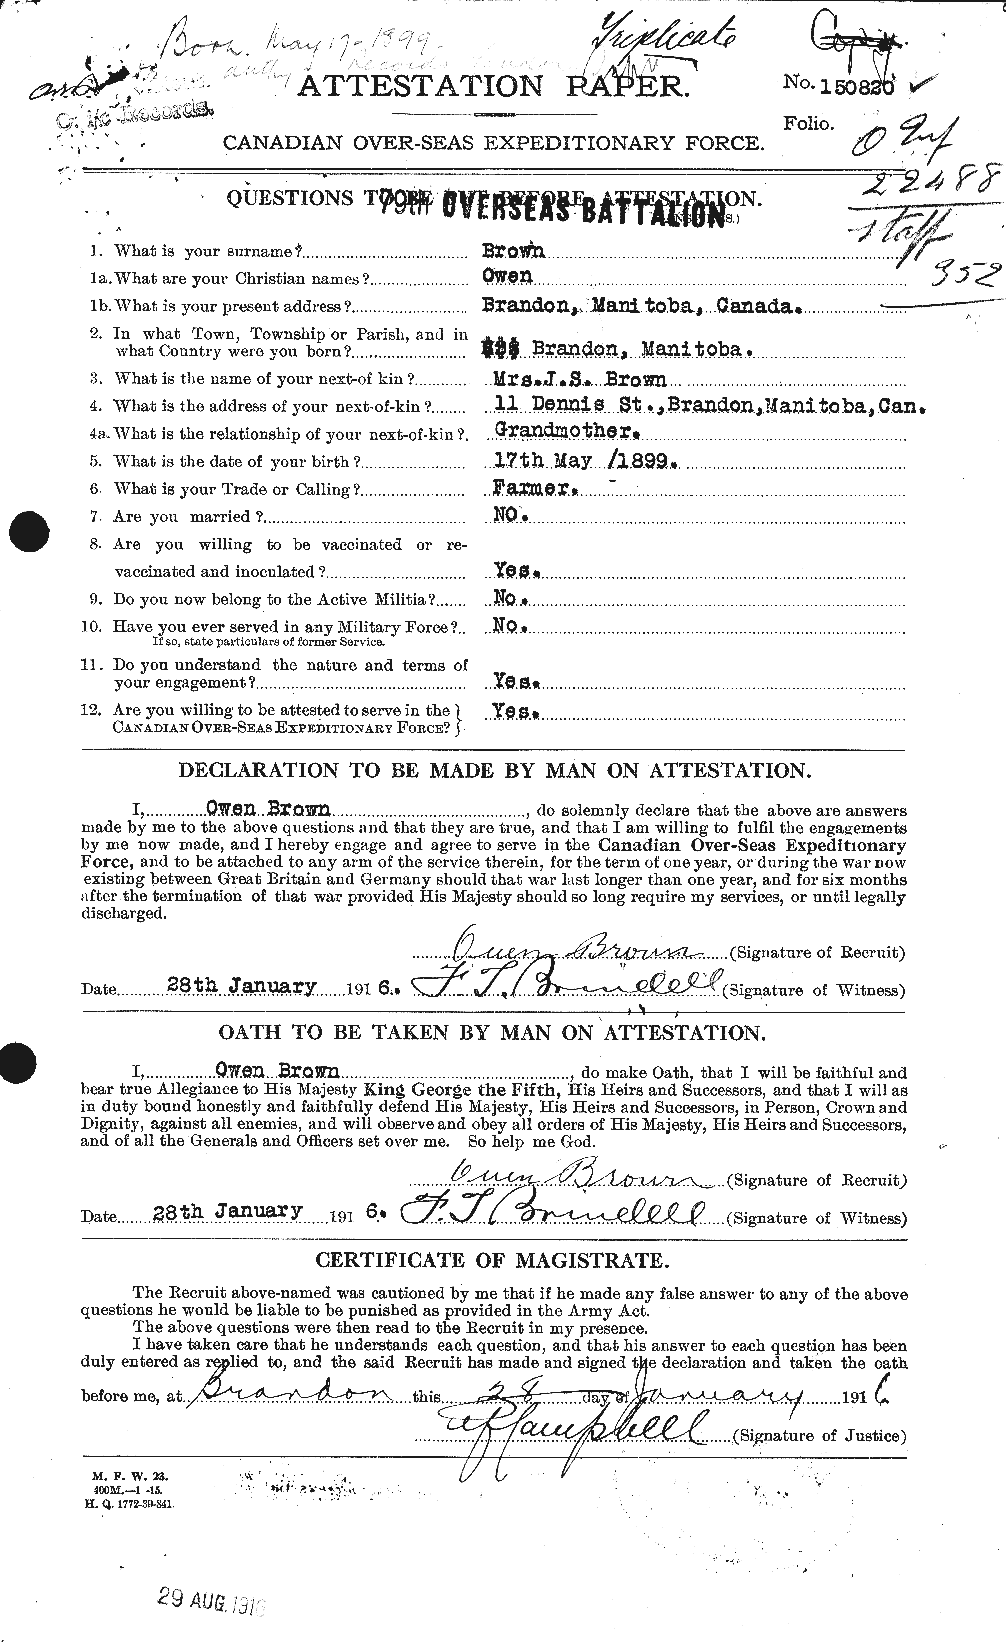 Personnel Records of the First World War - CEF 267148a